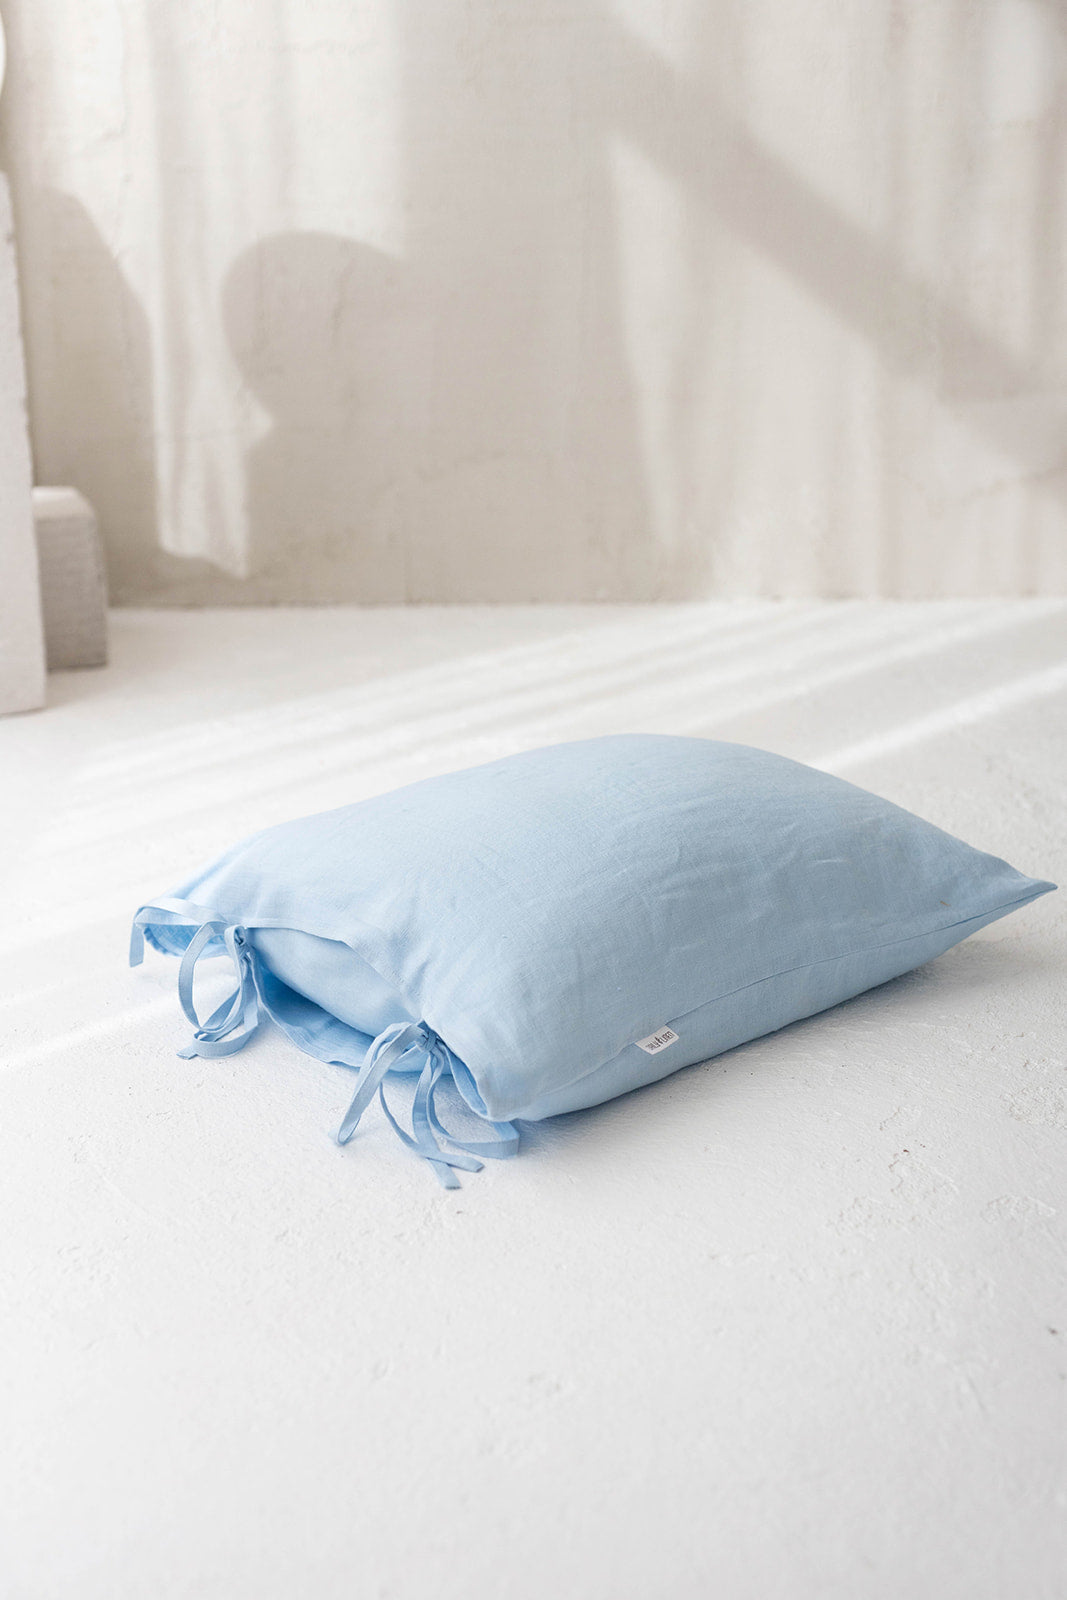 Linen Pillowcase With Ties In Sky Blue Color 1 - Daily Linen